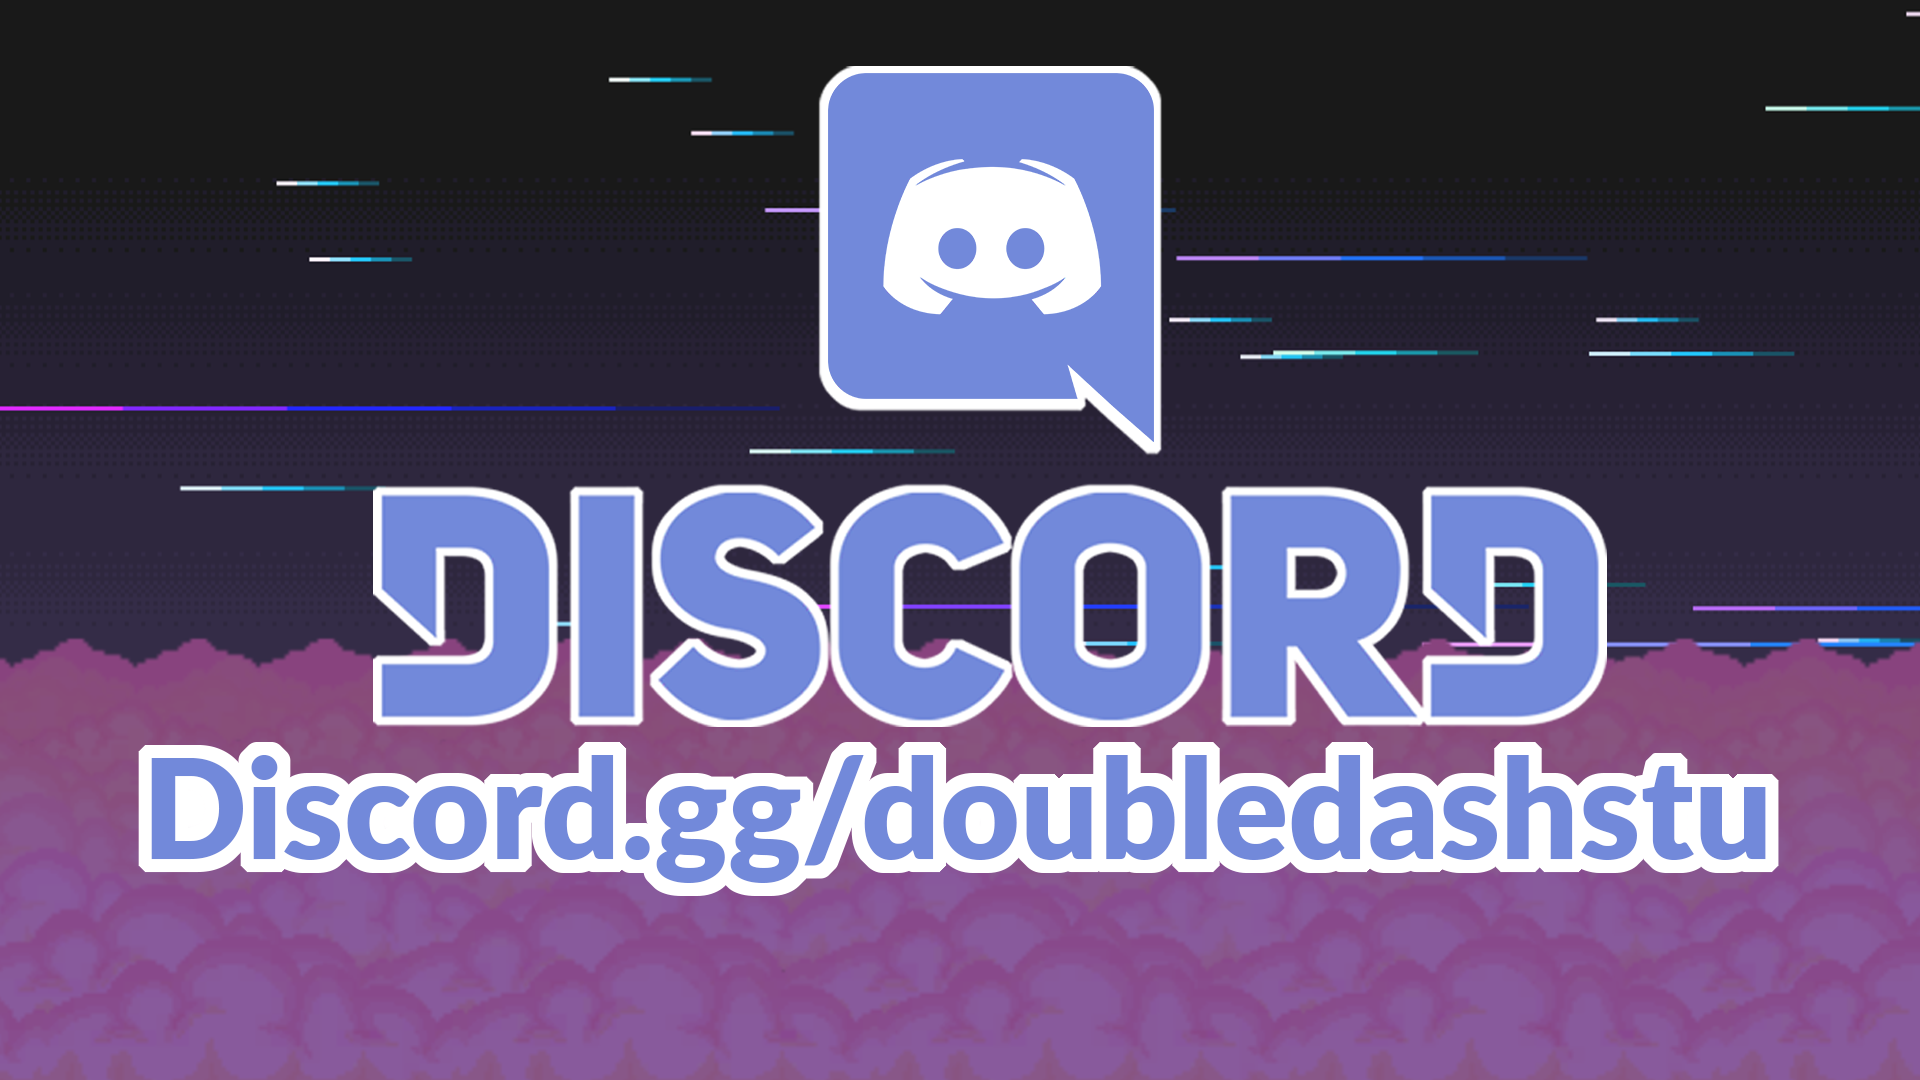 Discord Play room server has thousands of pedophiles YouTube